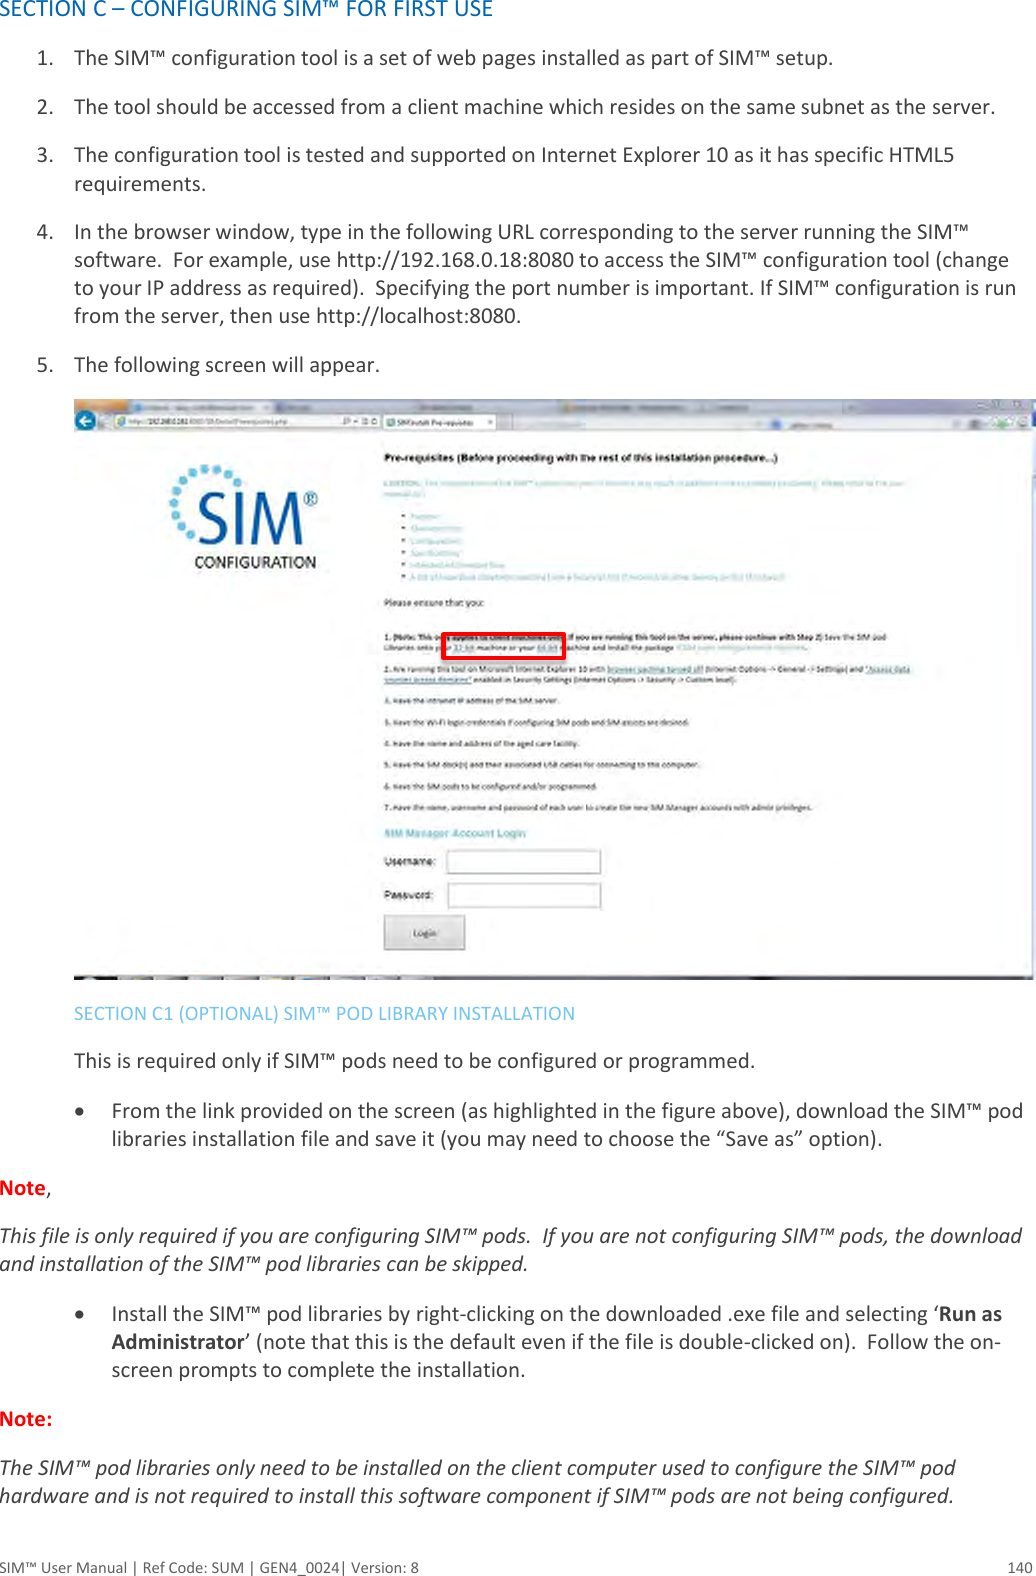  SIM™ User Manual | Ref Code: SUM | GEN4_0024| Version: 8  140 SECTION C – CONFIGURING SIM™ FOR FIRST USE 1. The SIM™ configuration tool is a set of web pages installed as part of SIM™ setup. 2. The tool should be accessed from a client machine which resides on the same subnet as the server. 3. The configuration tool is tested and supported on Internet Explorer 10 as it has specific HTML5 requirements. 4. In the browser window, type in the following URL corresponding to the server running the SIM™ software.  For example, use http://192.168.0.18:8080 to access the SIM™ configuration tool (change to your IP address as required).  Specifying the port number is important. If SIM™ configuration is run from the server, then use http://localhost:8080. 5. The following screen will appear.     SECTION C1 (OPTIONAL) SIM™ POD LIBRARY INSTALLATION   This is required only if SIM™ pods need to be configured or programmed.  From the link provided on the screen (as highlighted in the figure above), download the SIM™ pod libraries installation file and save it (you may need to choose the “Save as” option).   Note,  This file is only required if you are configuring SIM™ pods.  If you are not configuring SIM™ pods, the download and installation of the SIM™ pod libraries can be skipped.  Install the SIM™ pod libraries by right-clicking on the downloaded .exe file and selecting ‘Run as Administrator’ (note that this is the default even if the file is double-clicked on).  Follow the on-screen prompts to complete the installation. Note:   The SIM™ pod libraries only need to be installed on the client computer used to configure the SIM™ pod hardware and is not required to install this software component if SIM™ pods are not being configured. 